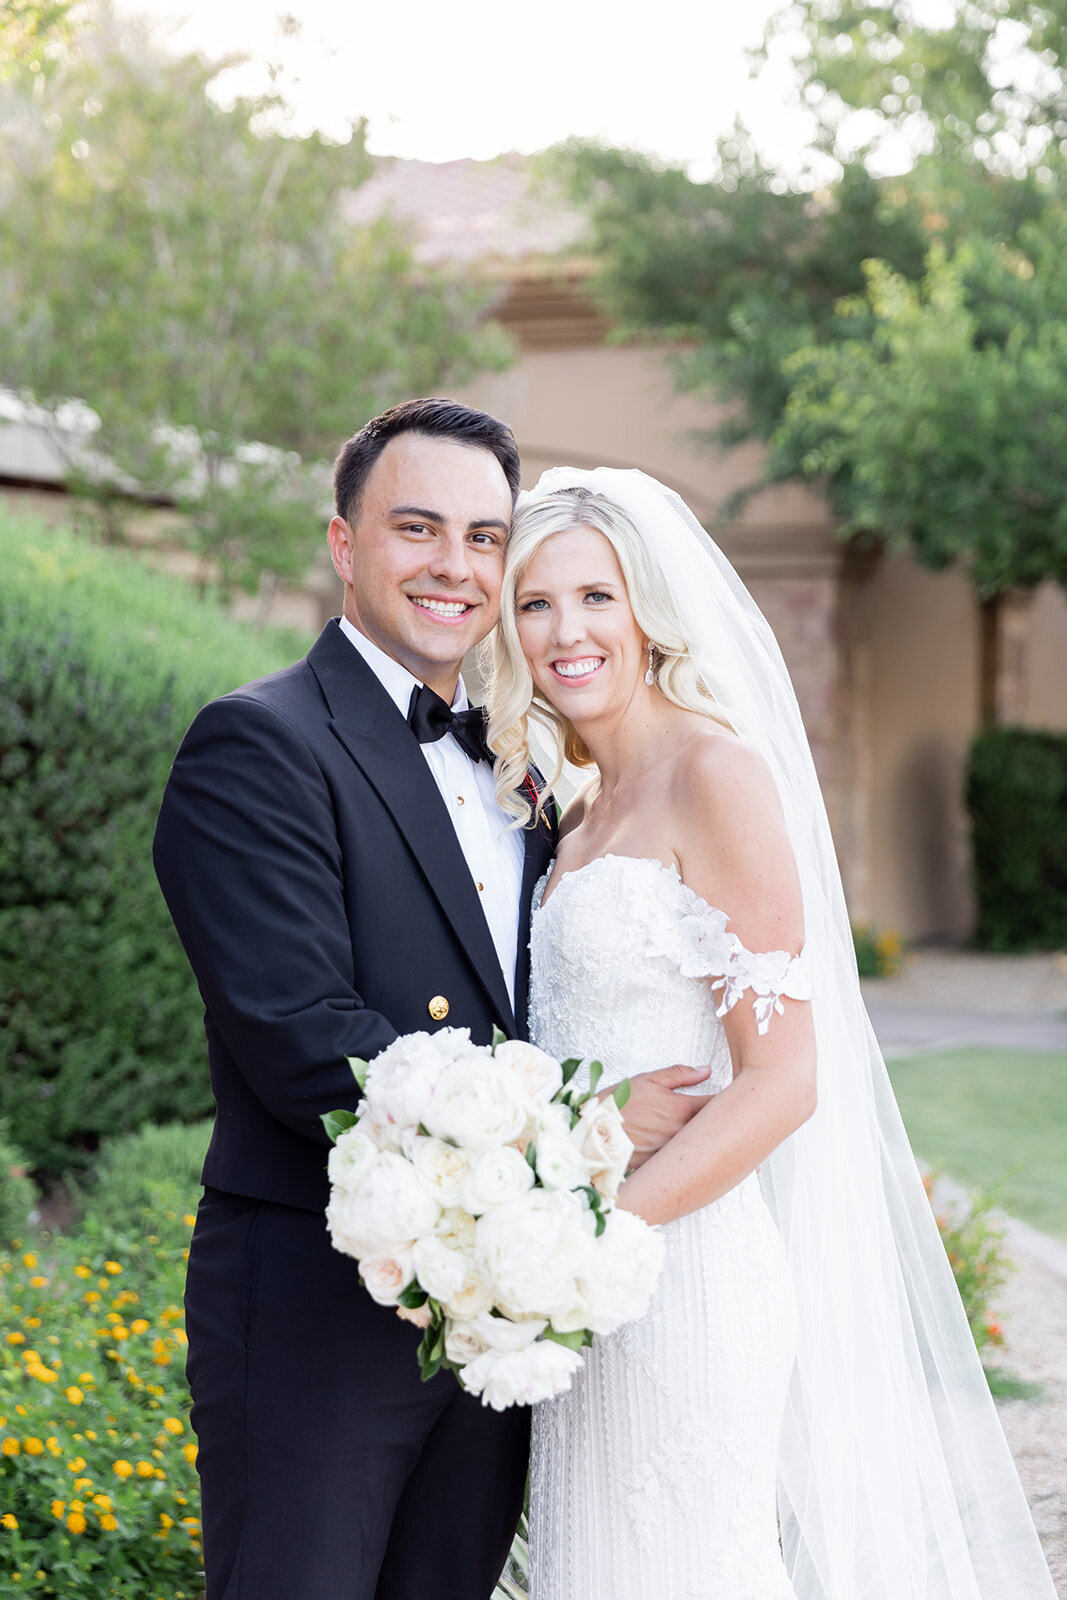 Karlie Colleen Photography - Holly & Ronnie Wedding - Seville Country Club - Gilbert Arizona-650